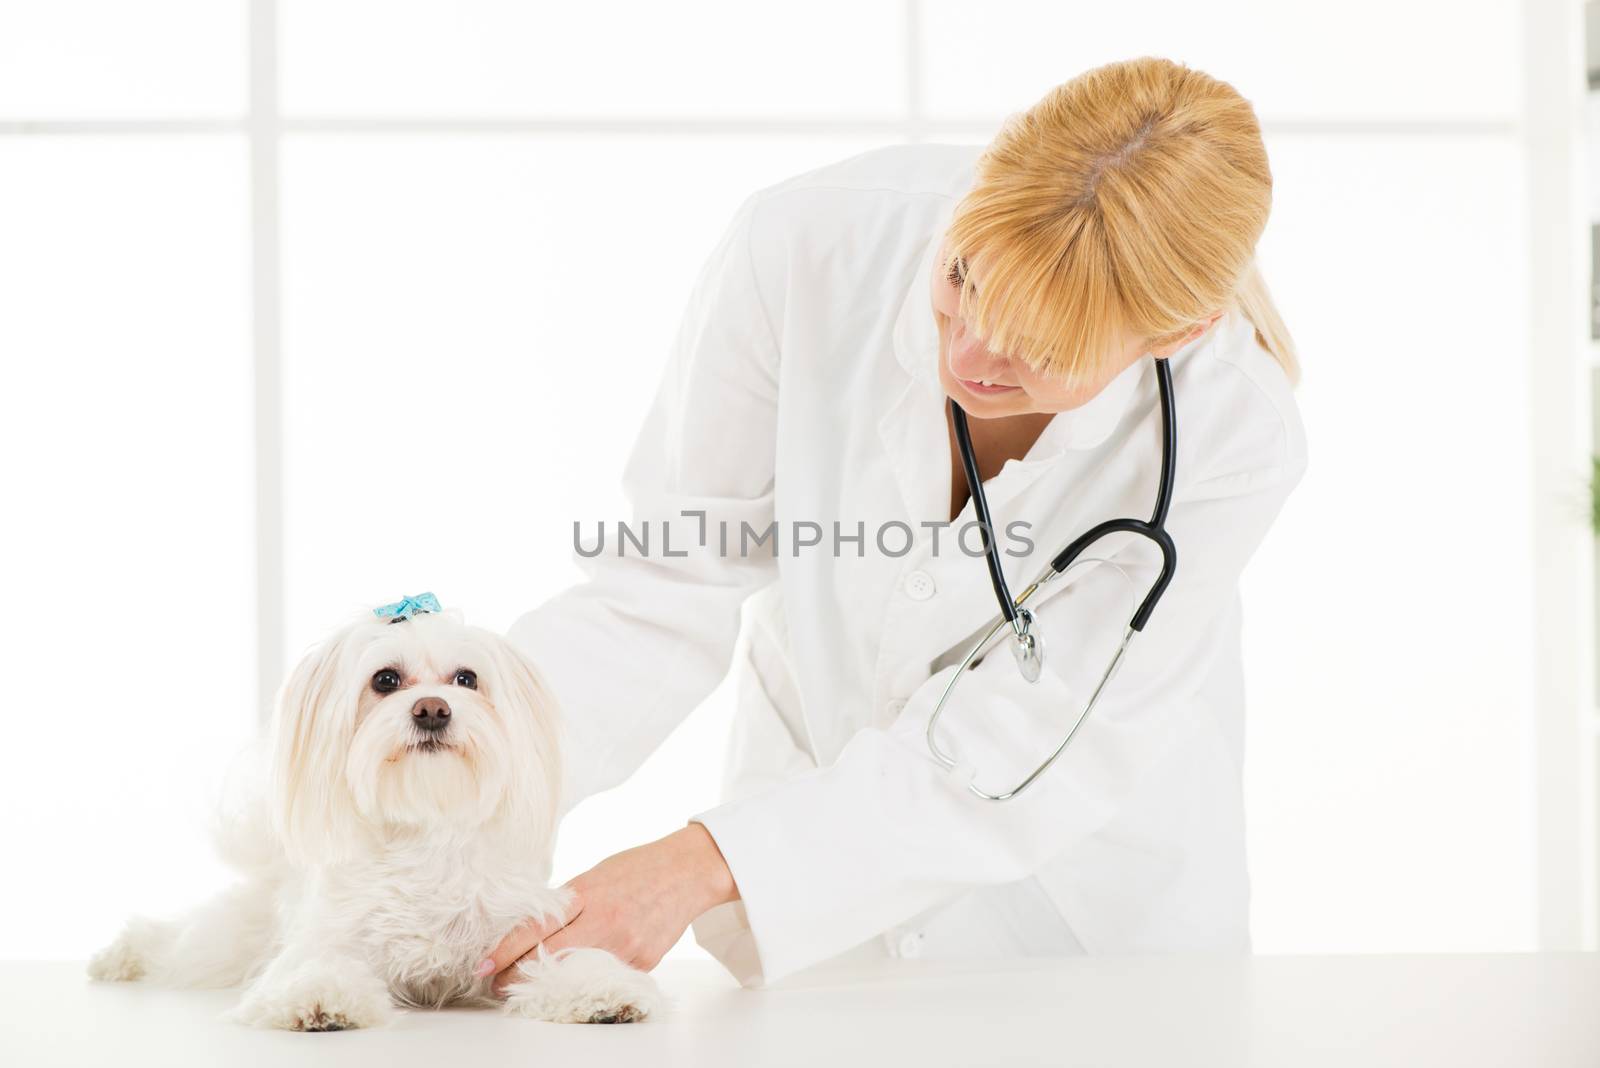 At the veterinary by MilanMarkovic78